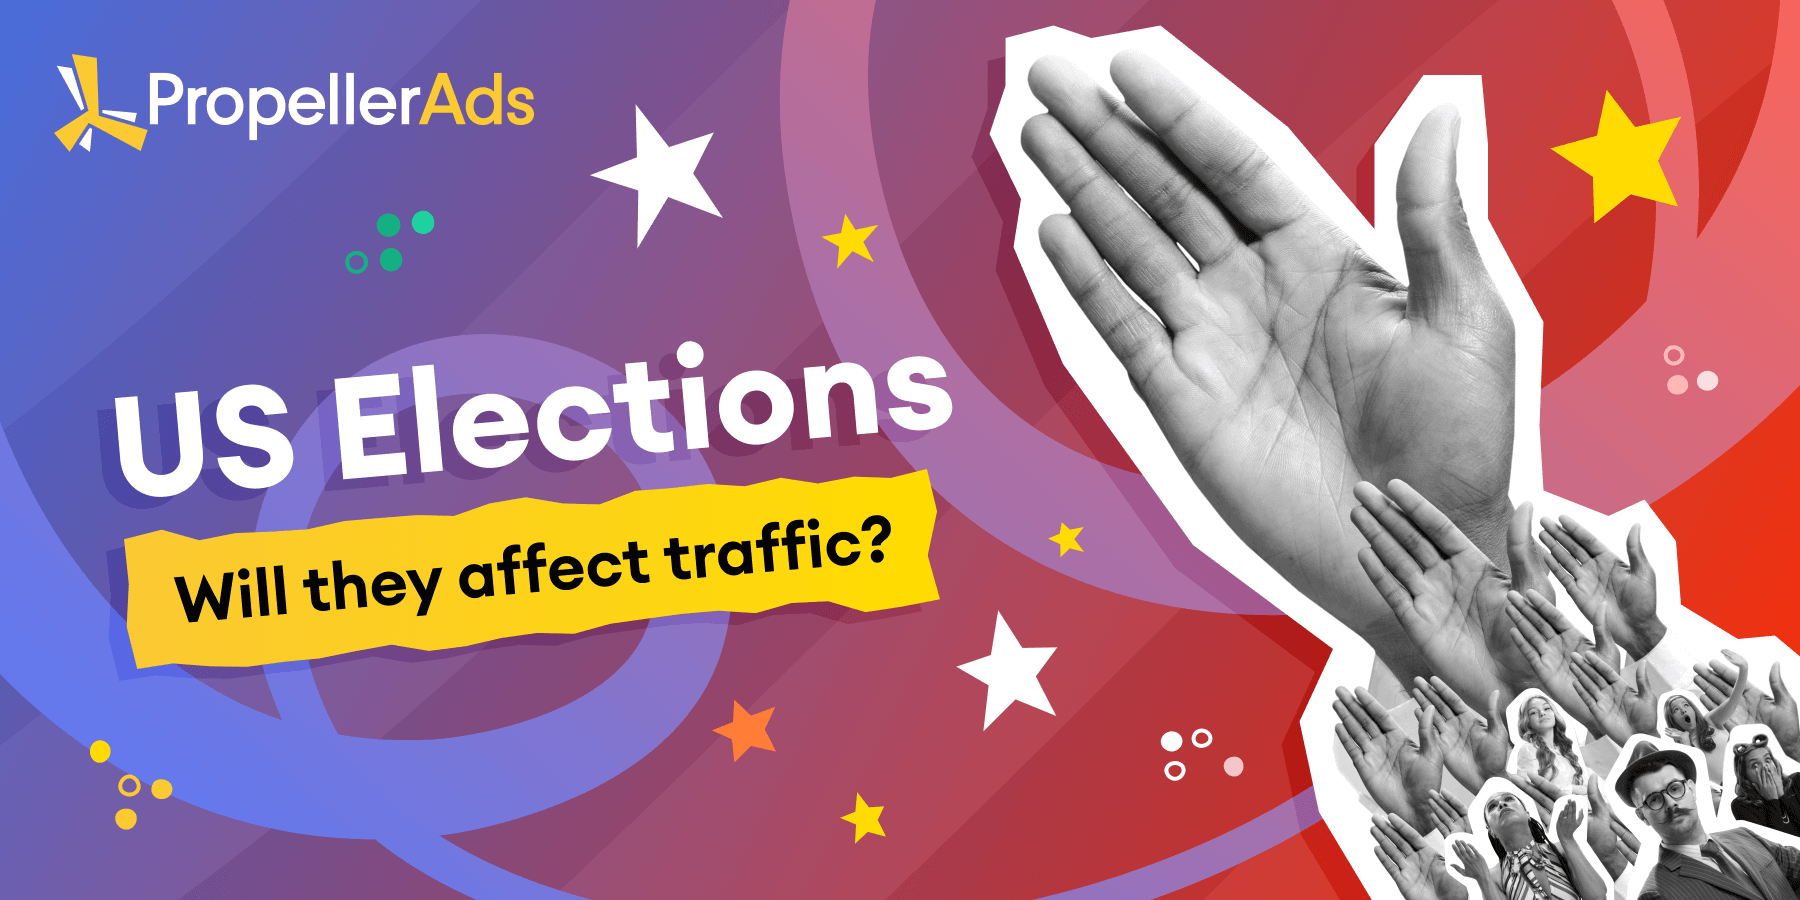 How US elections affect the world traffic?